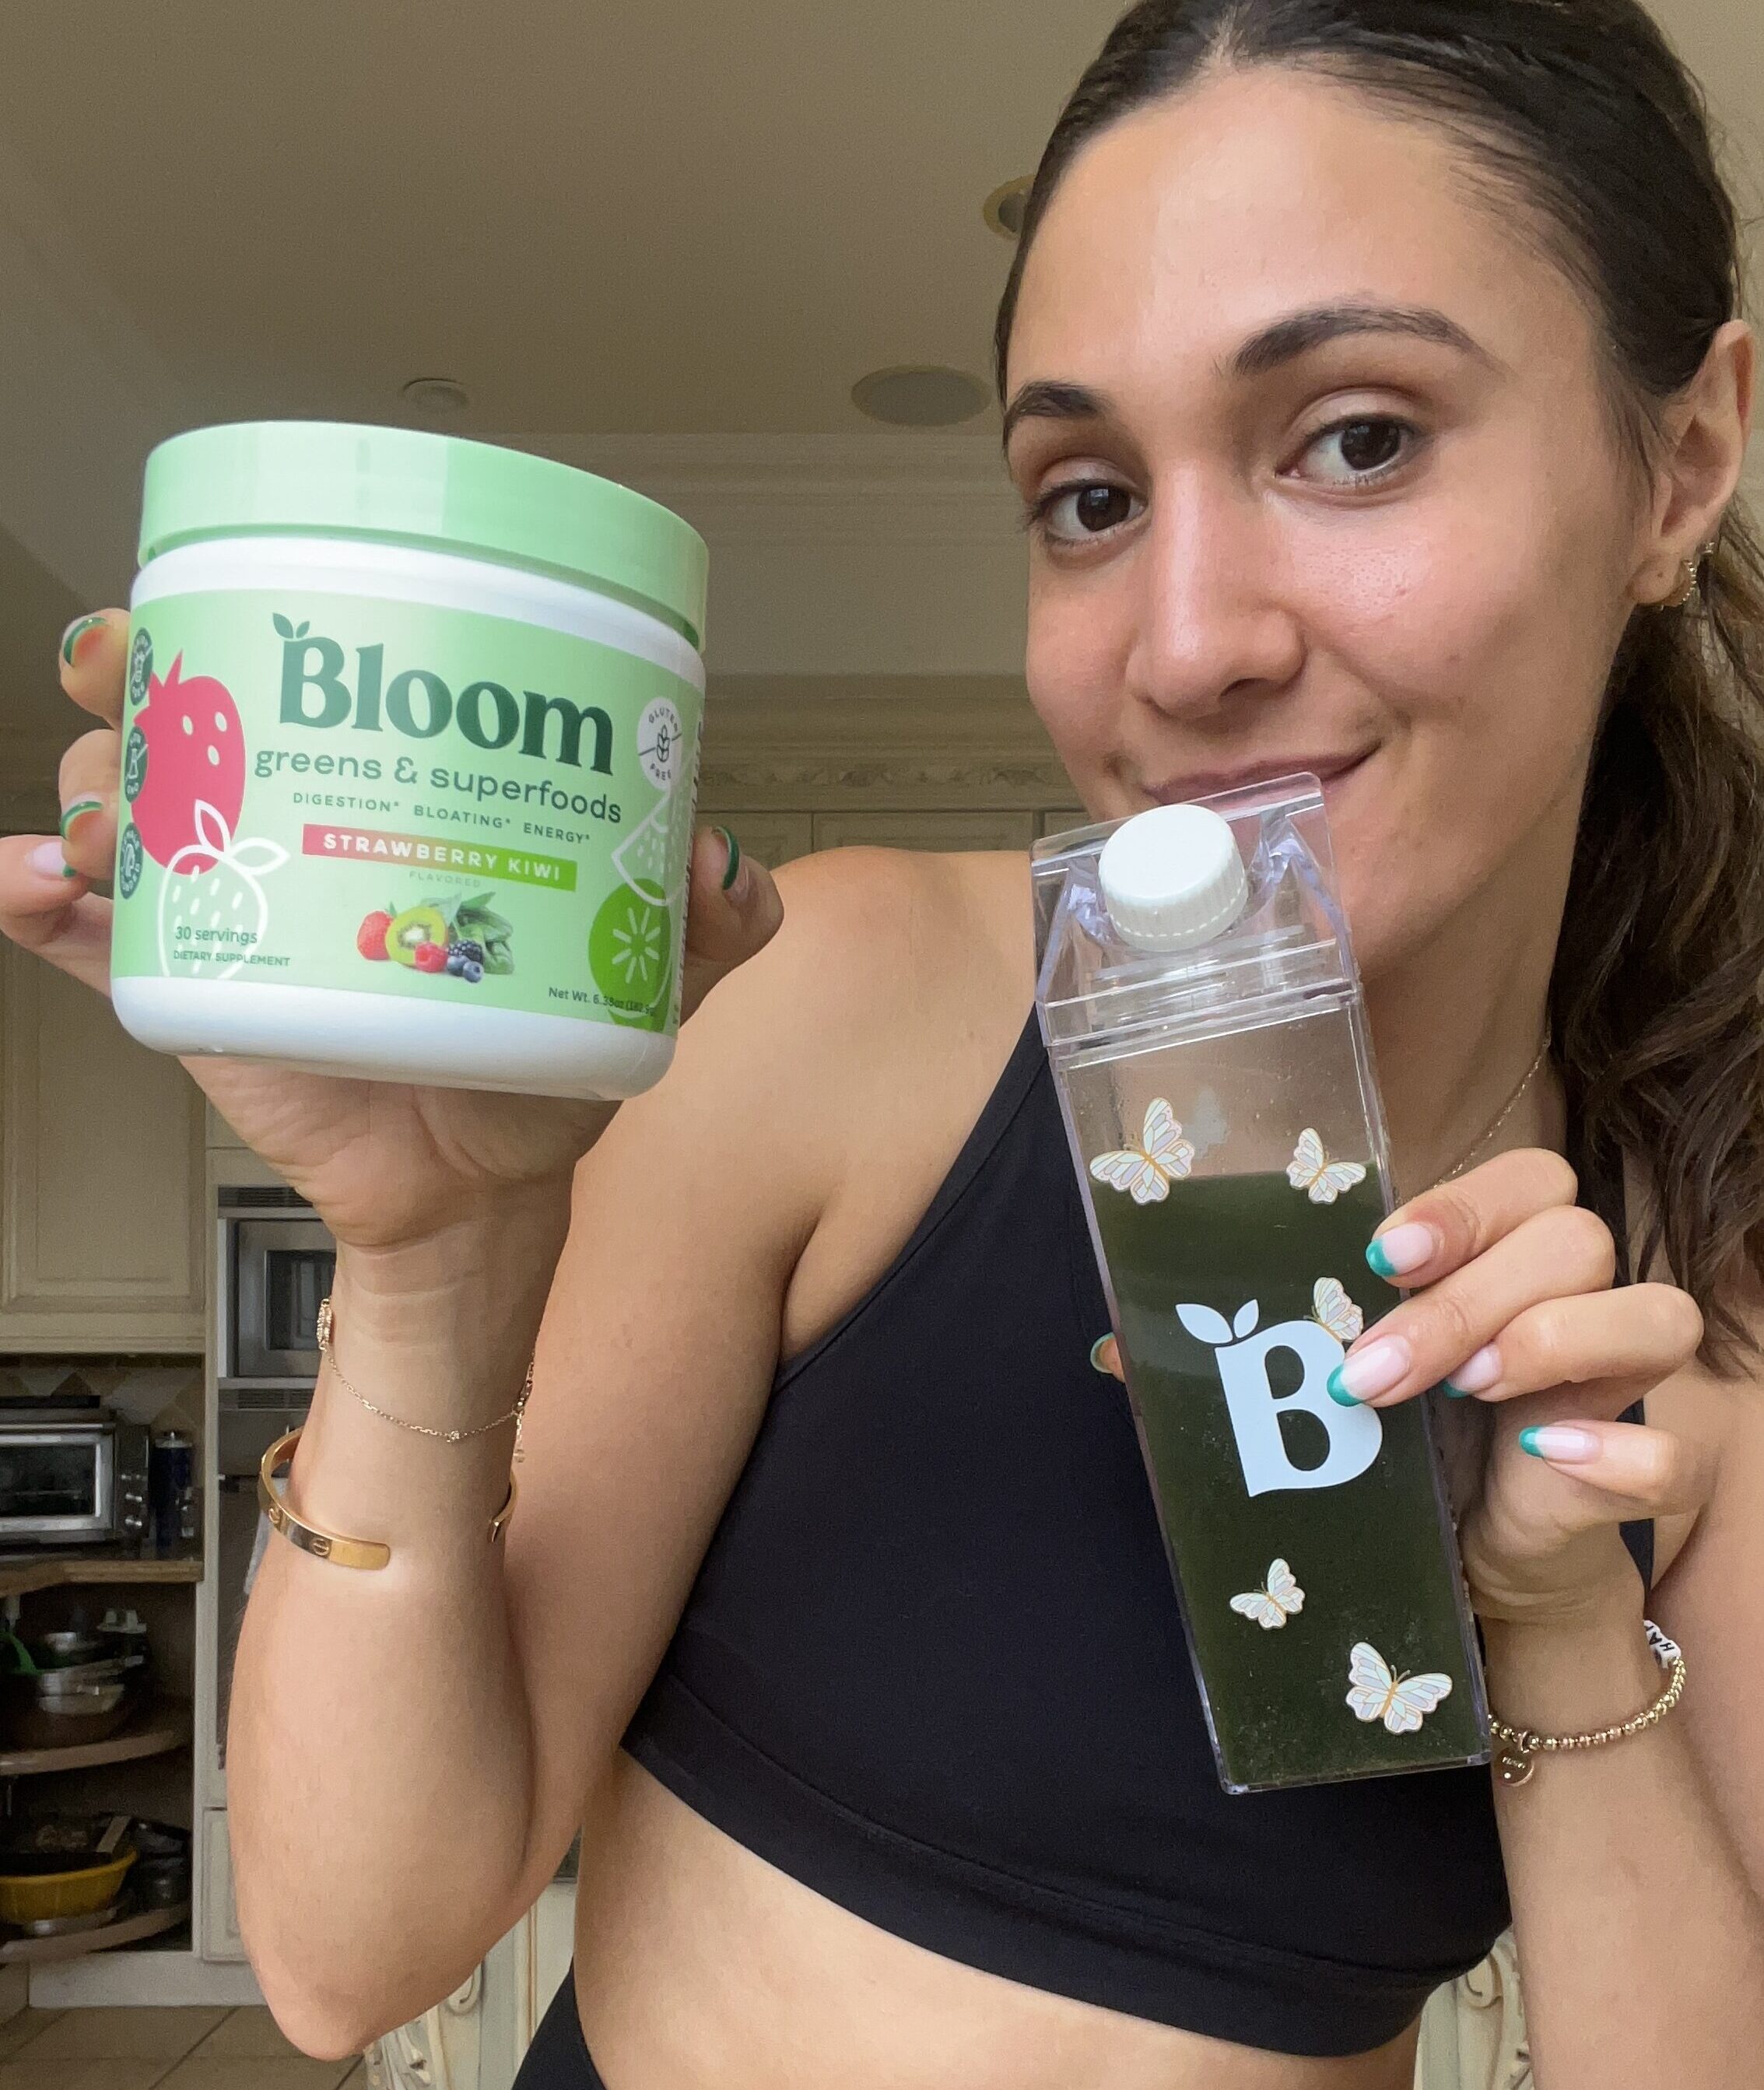 Here’s Why Bloom Greens is Better Than Other Green Powders